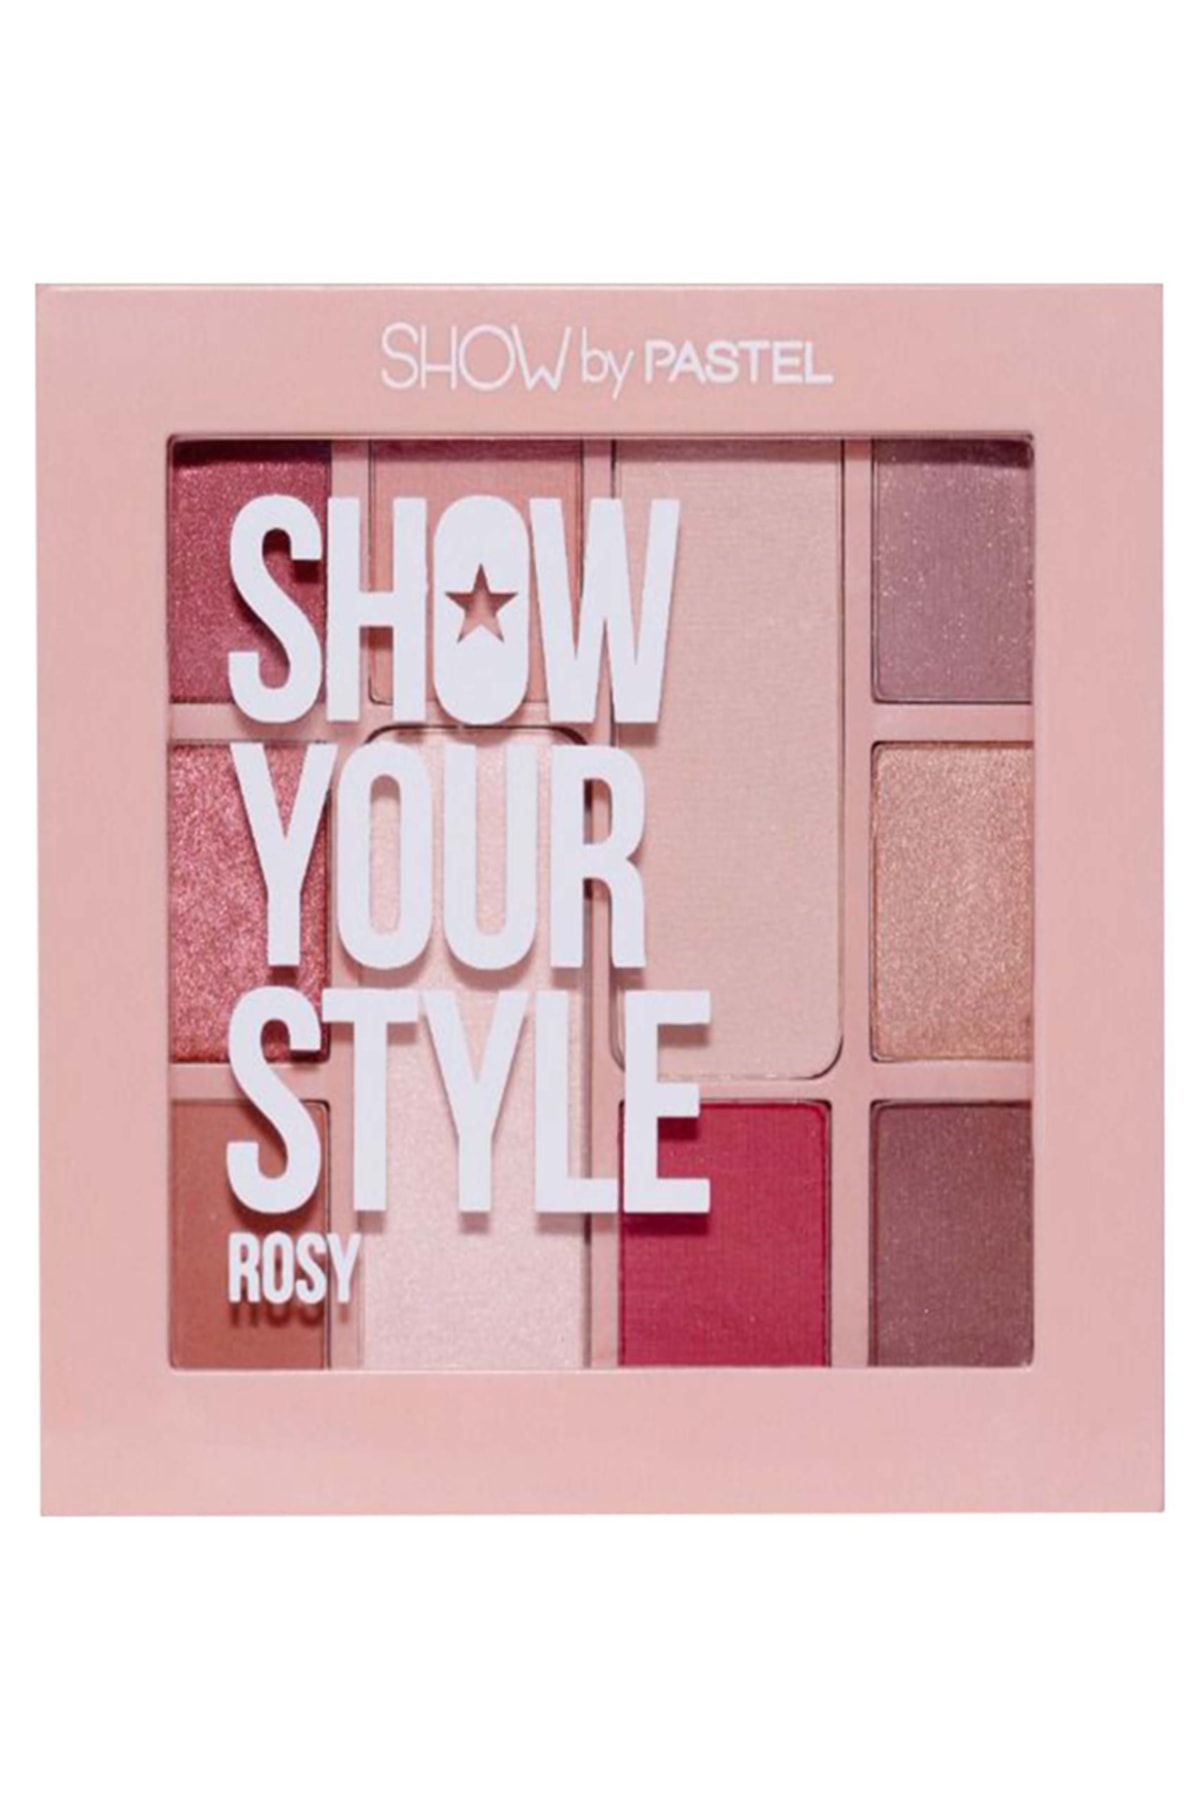 Pastel Show By Show Your Style - Rosy